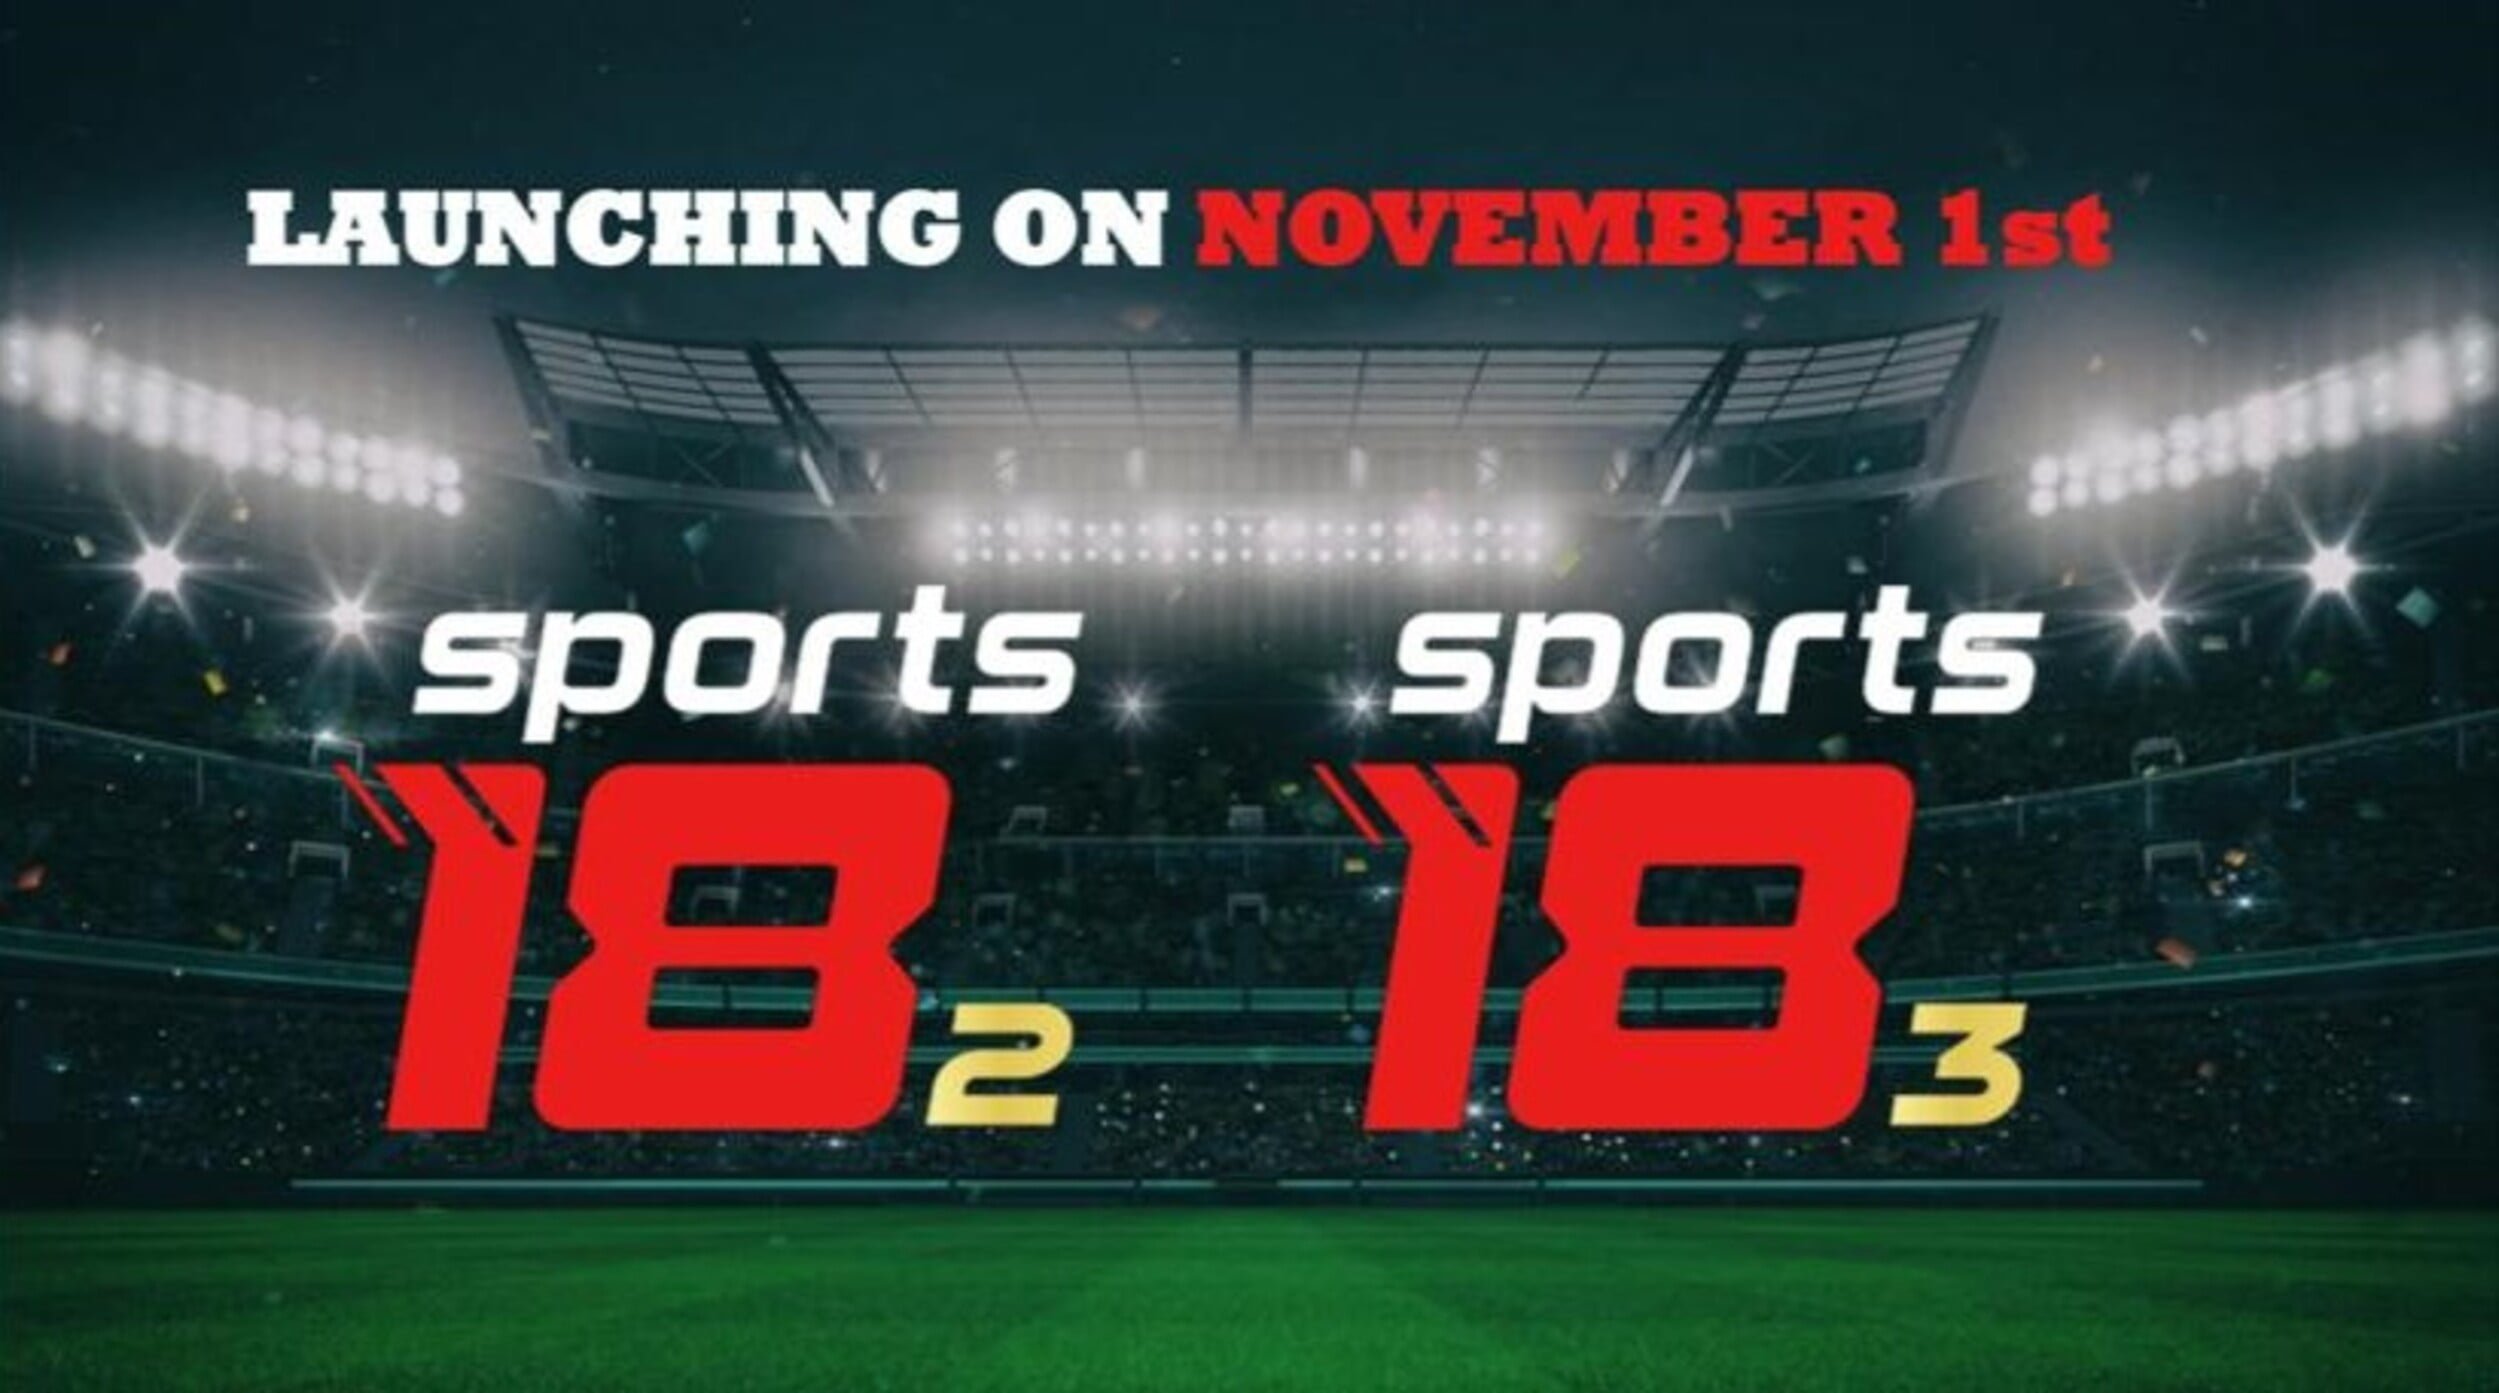 Sports18 2 3 launch